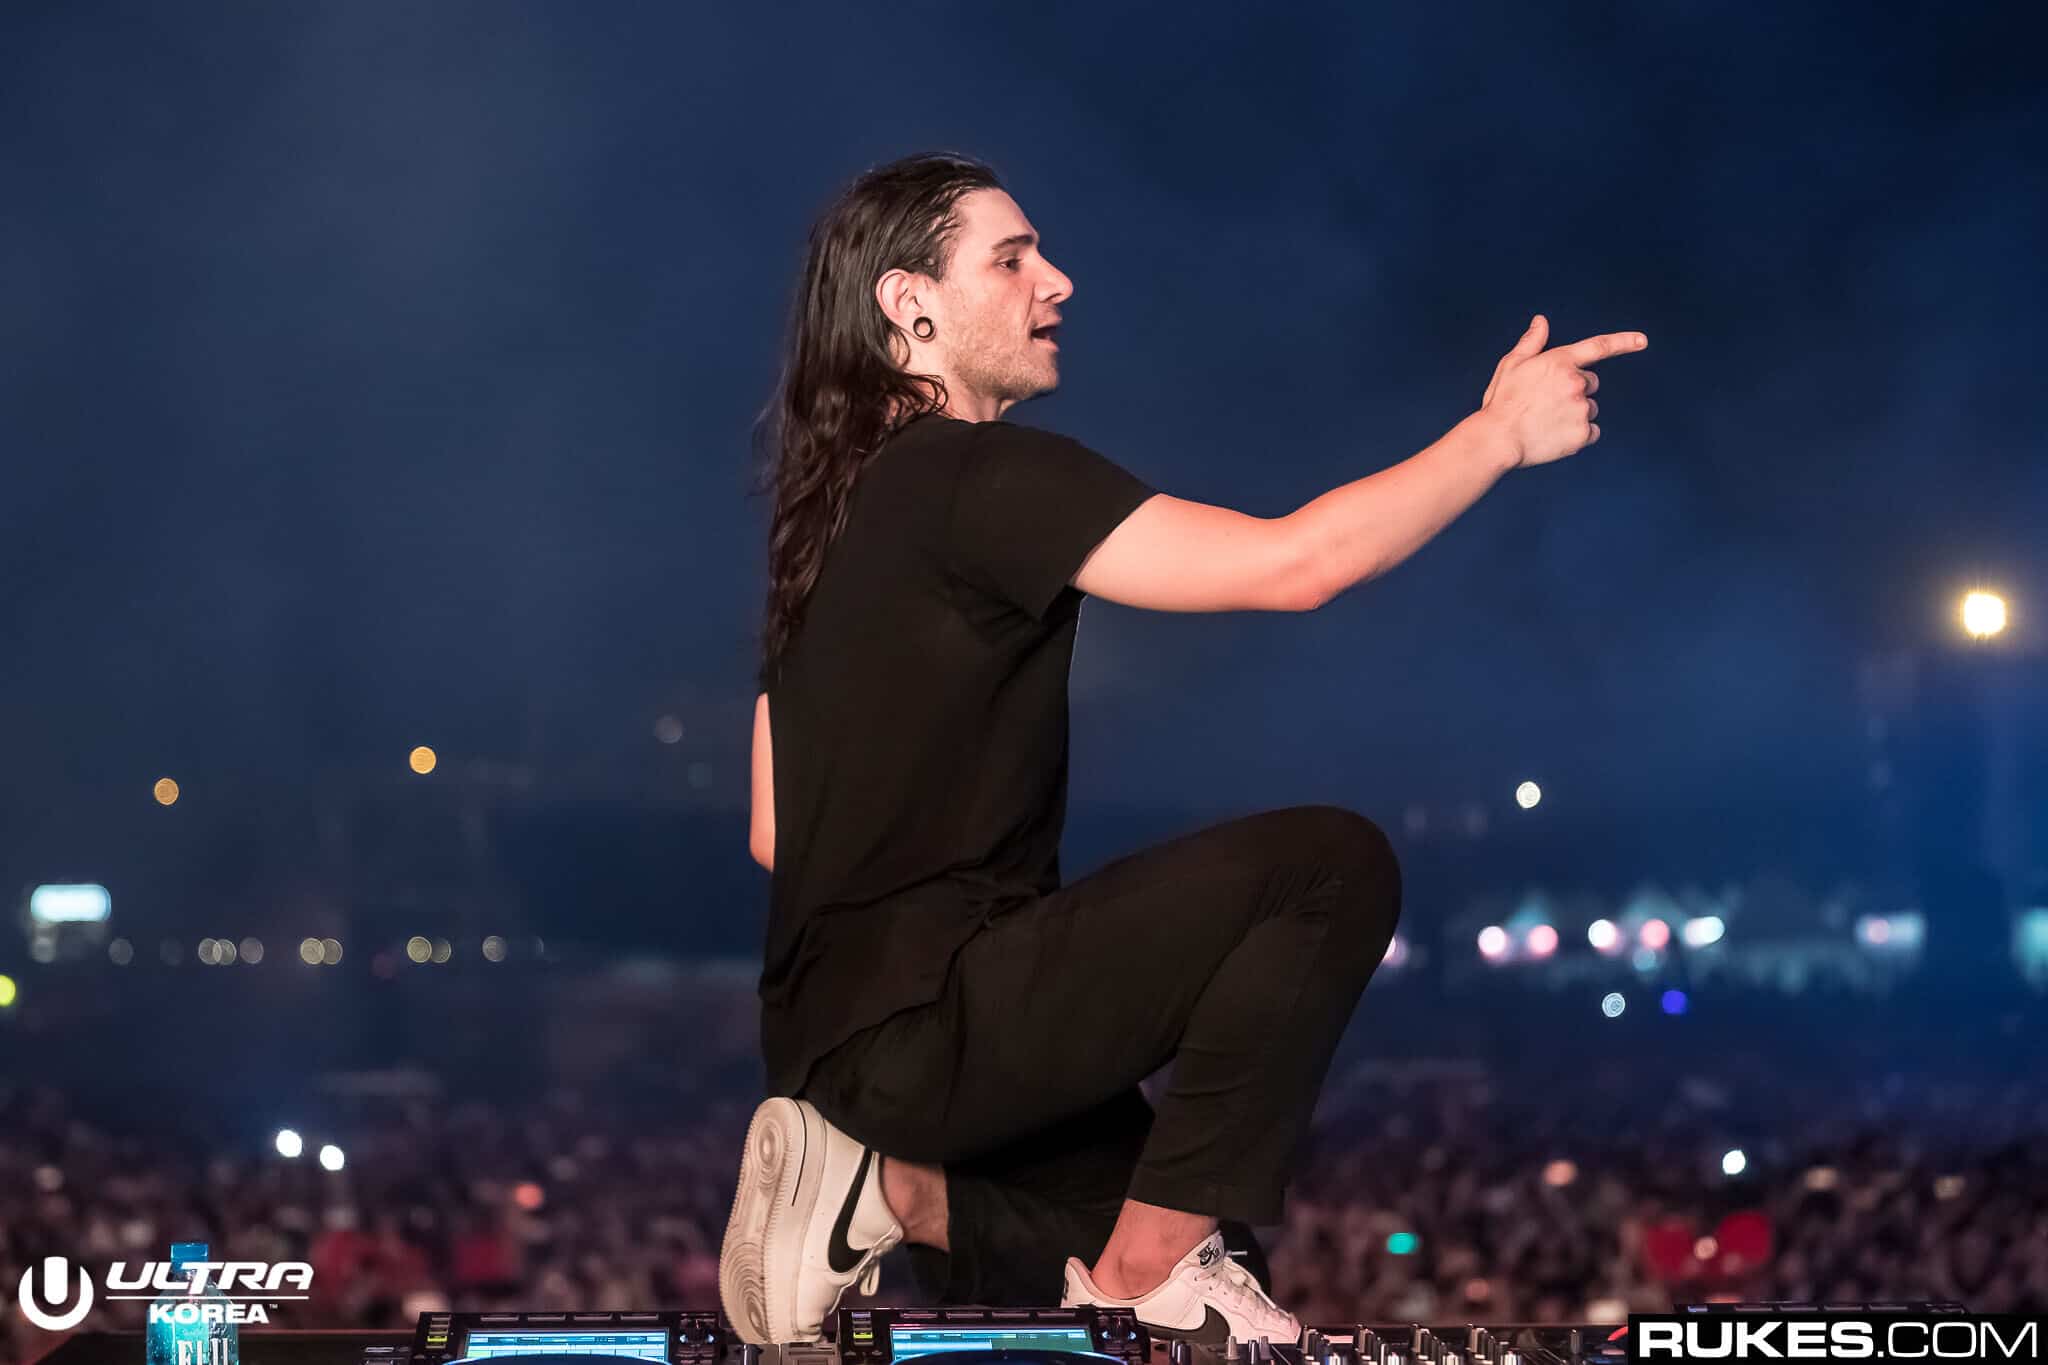 Skrillex states that new music is coming soon